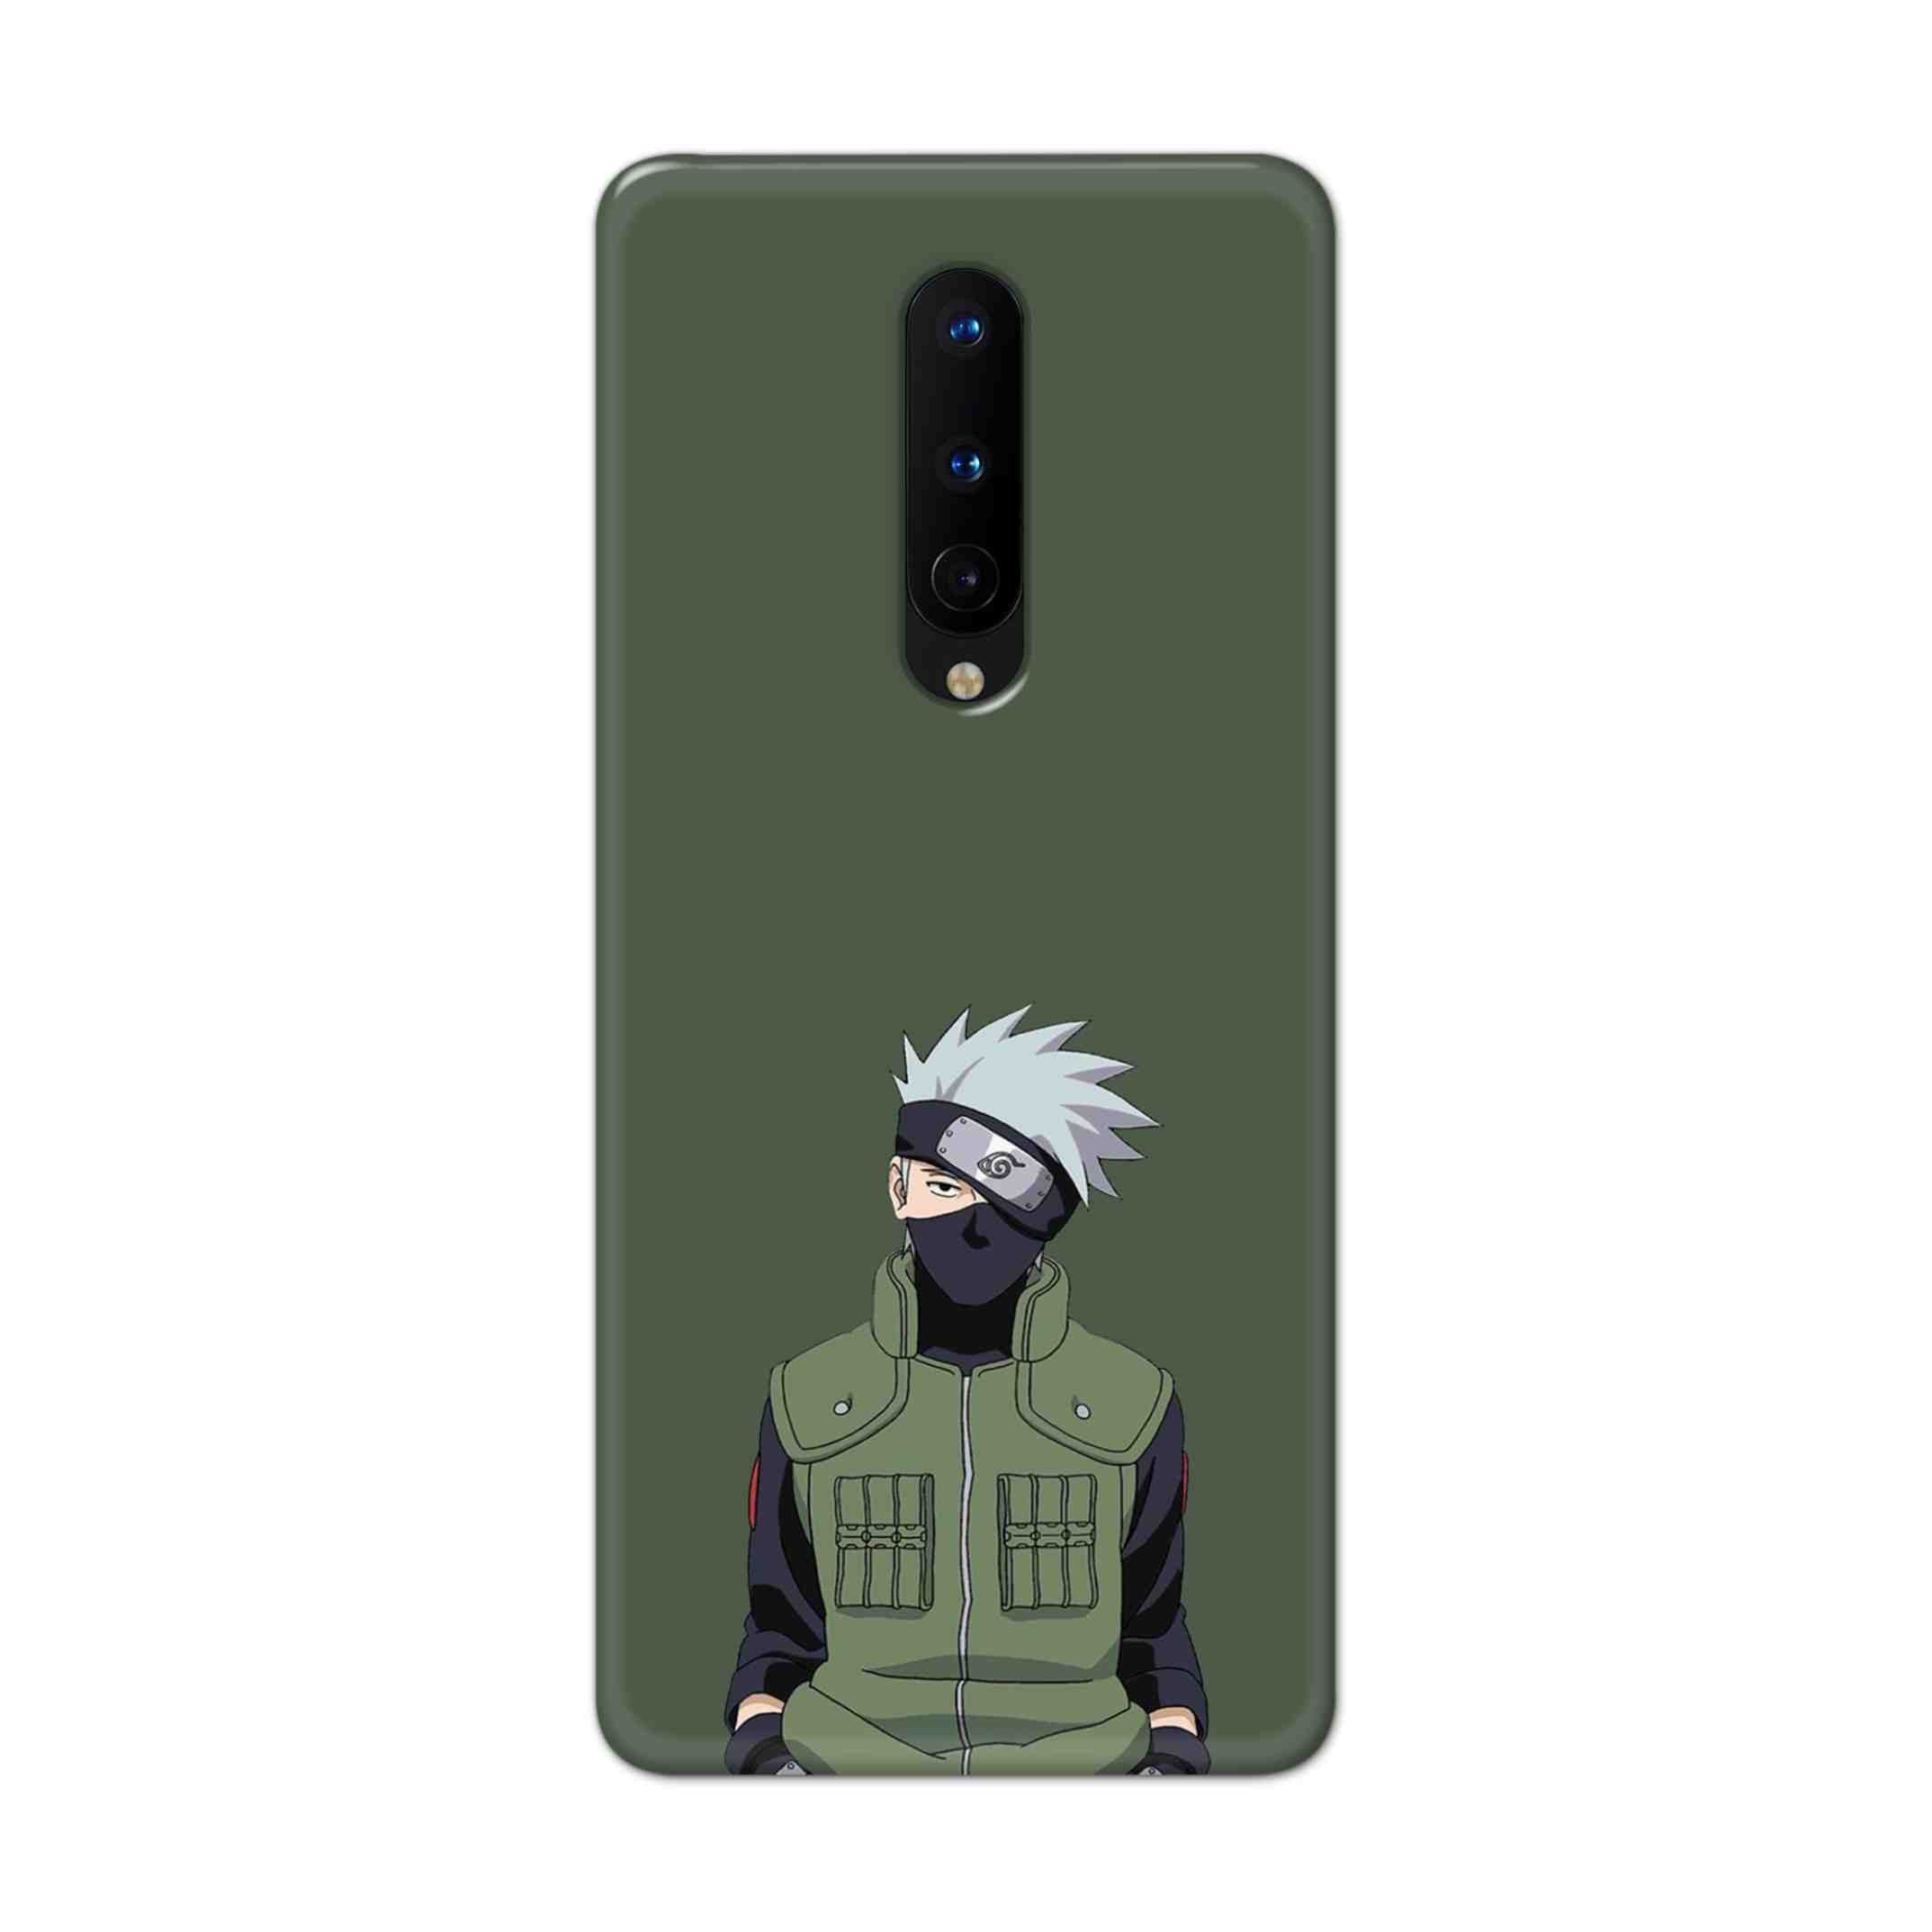 Buy Genesis Hard Back Mobile Phone Case Cover For OnePlus 8 Online